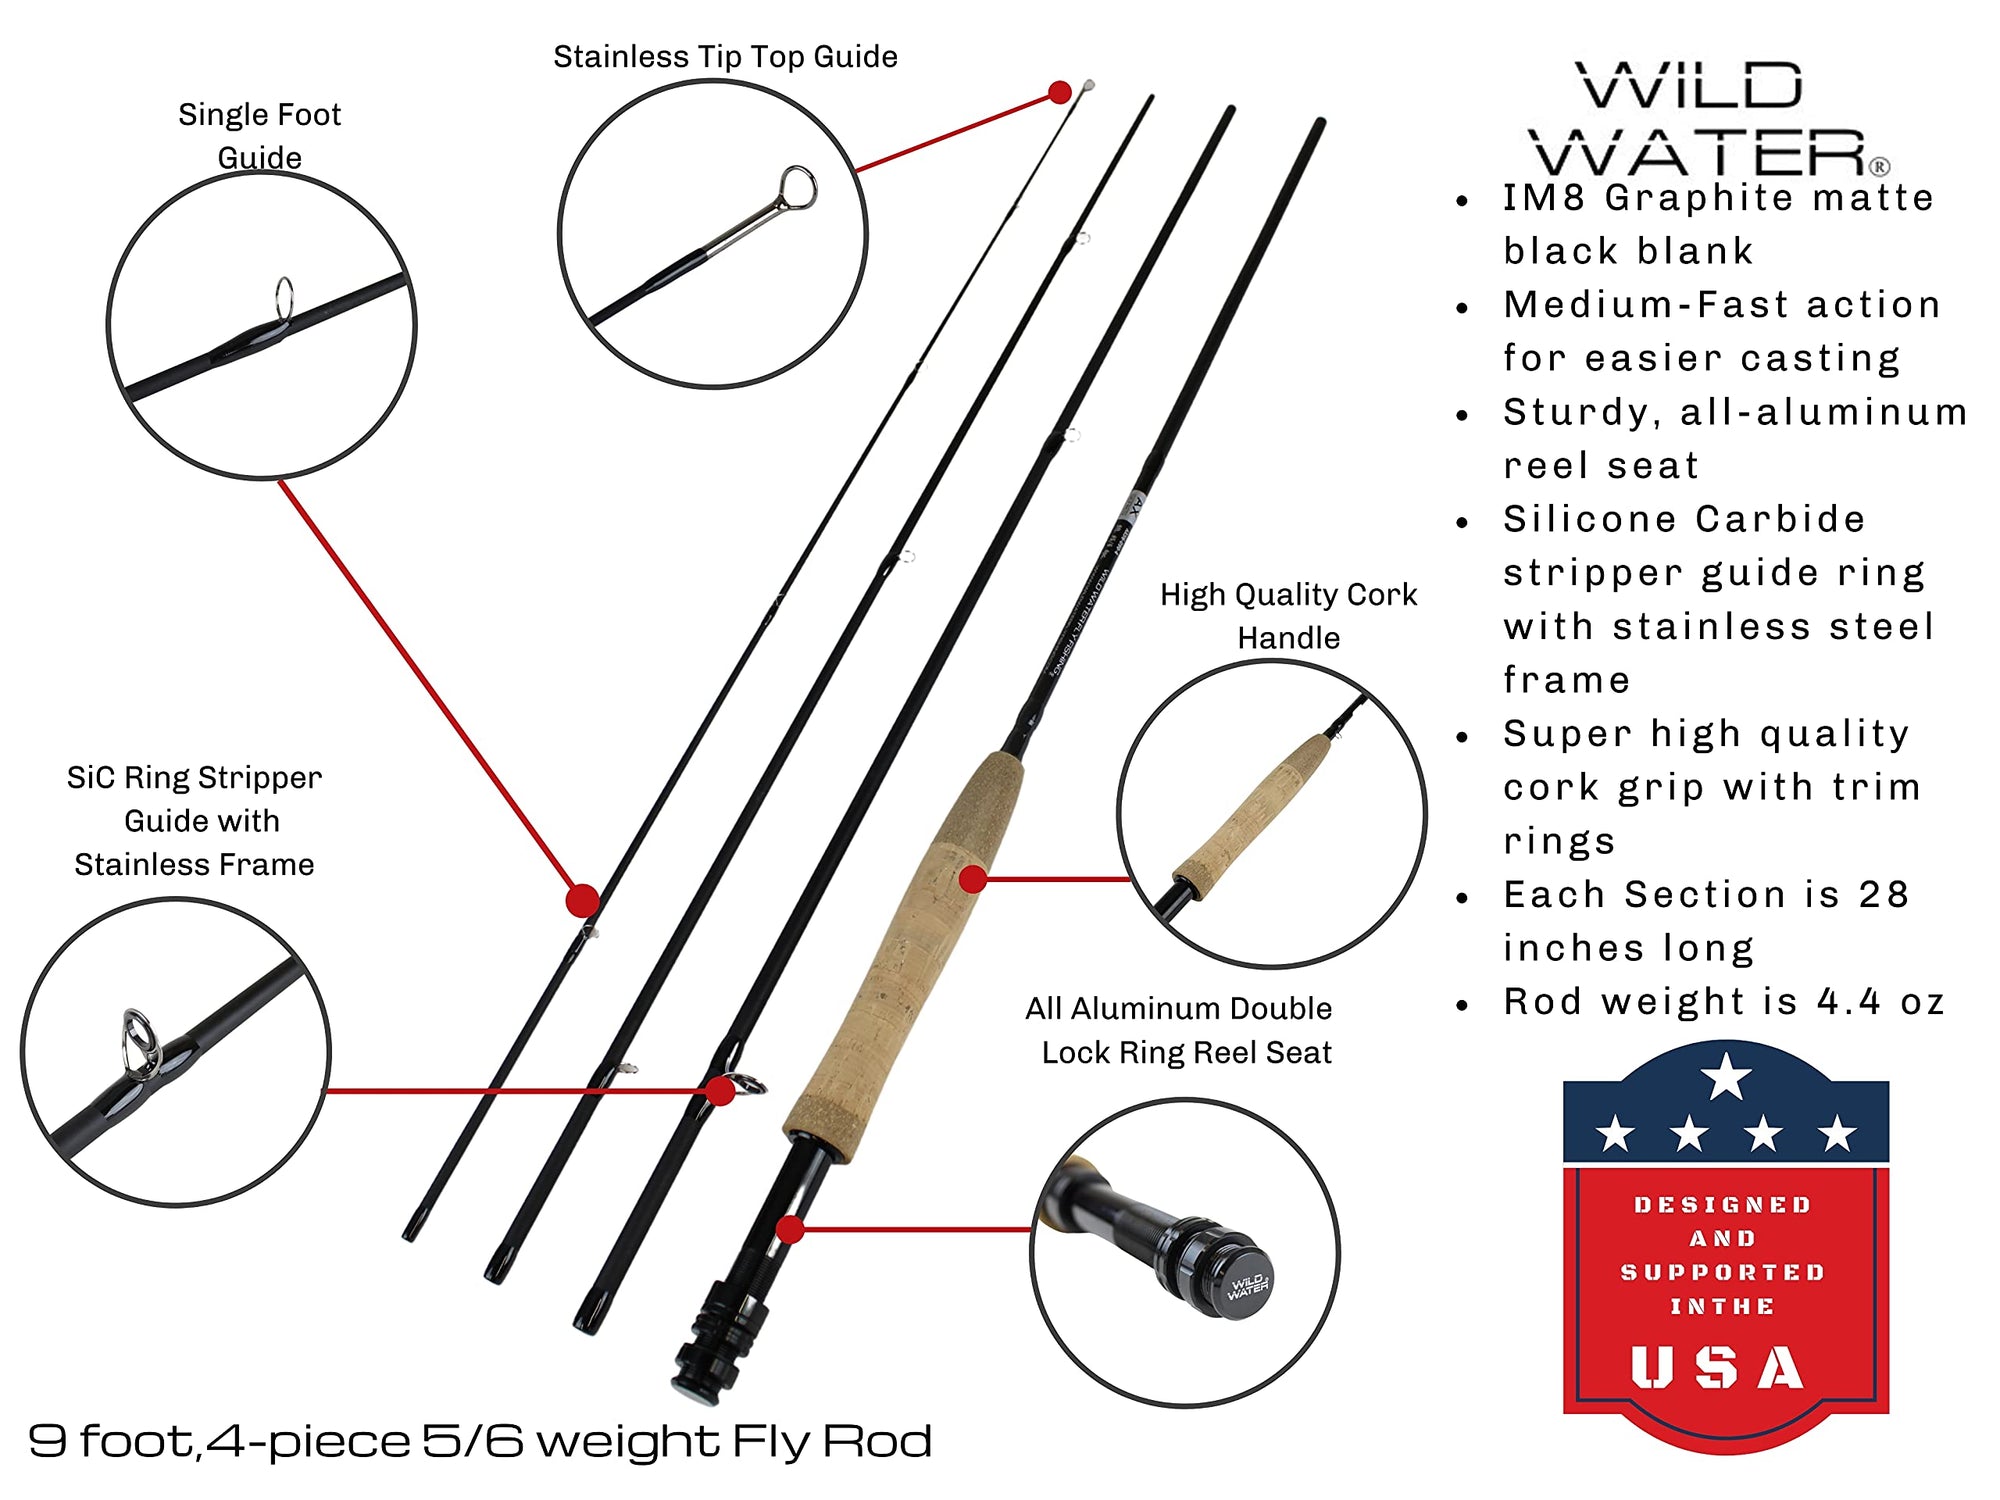 Wild Water 5/6 9 Rod Fly Fishing Complete Starter Package